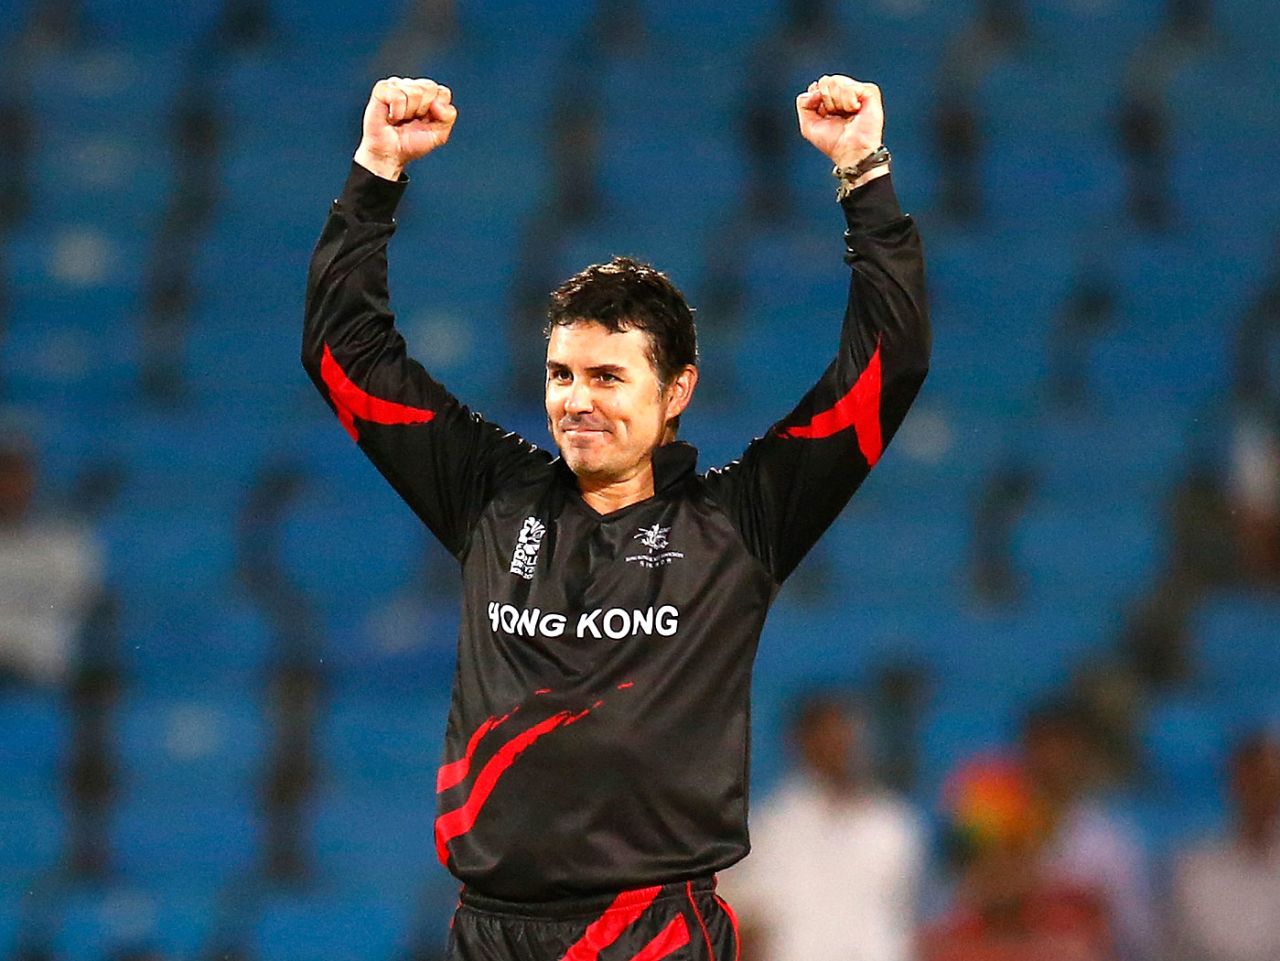 Ryan Campbell celebrates a wicket, Hong Kong v Afghanistan, Group B, World T20, Nagpur, March 10, 2016